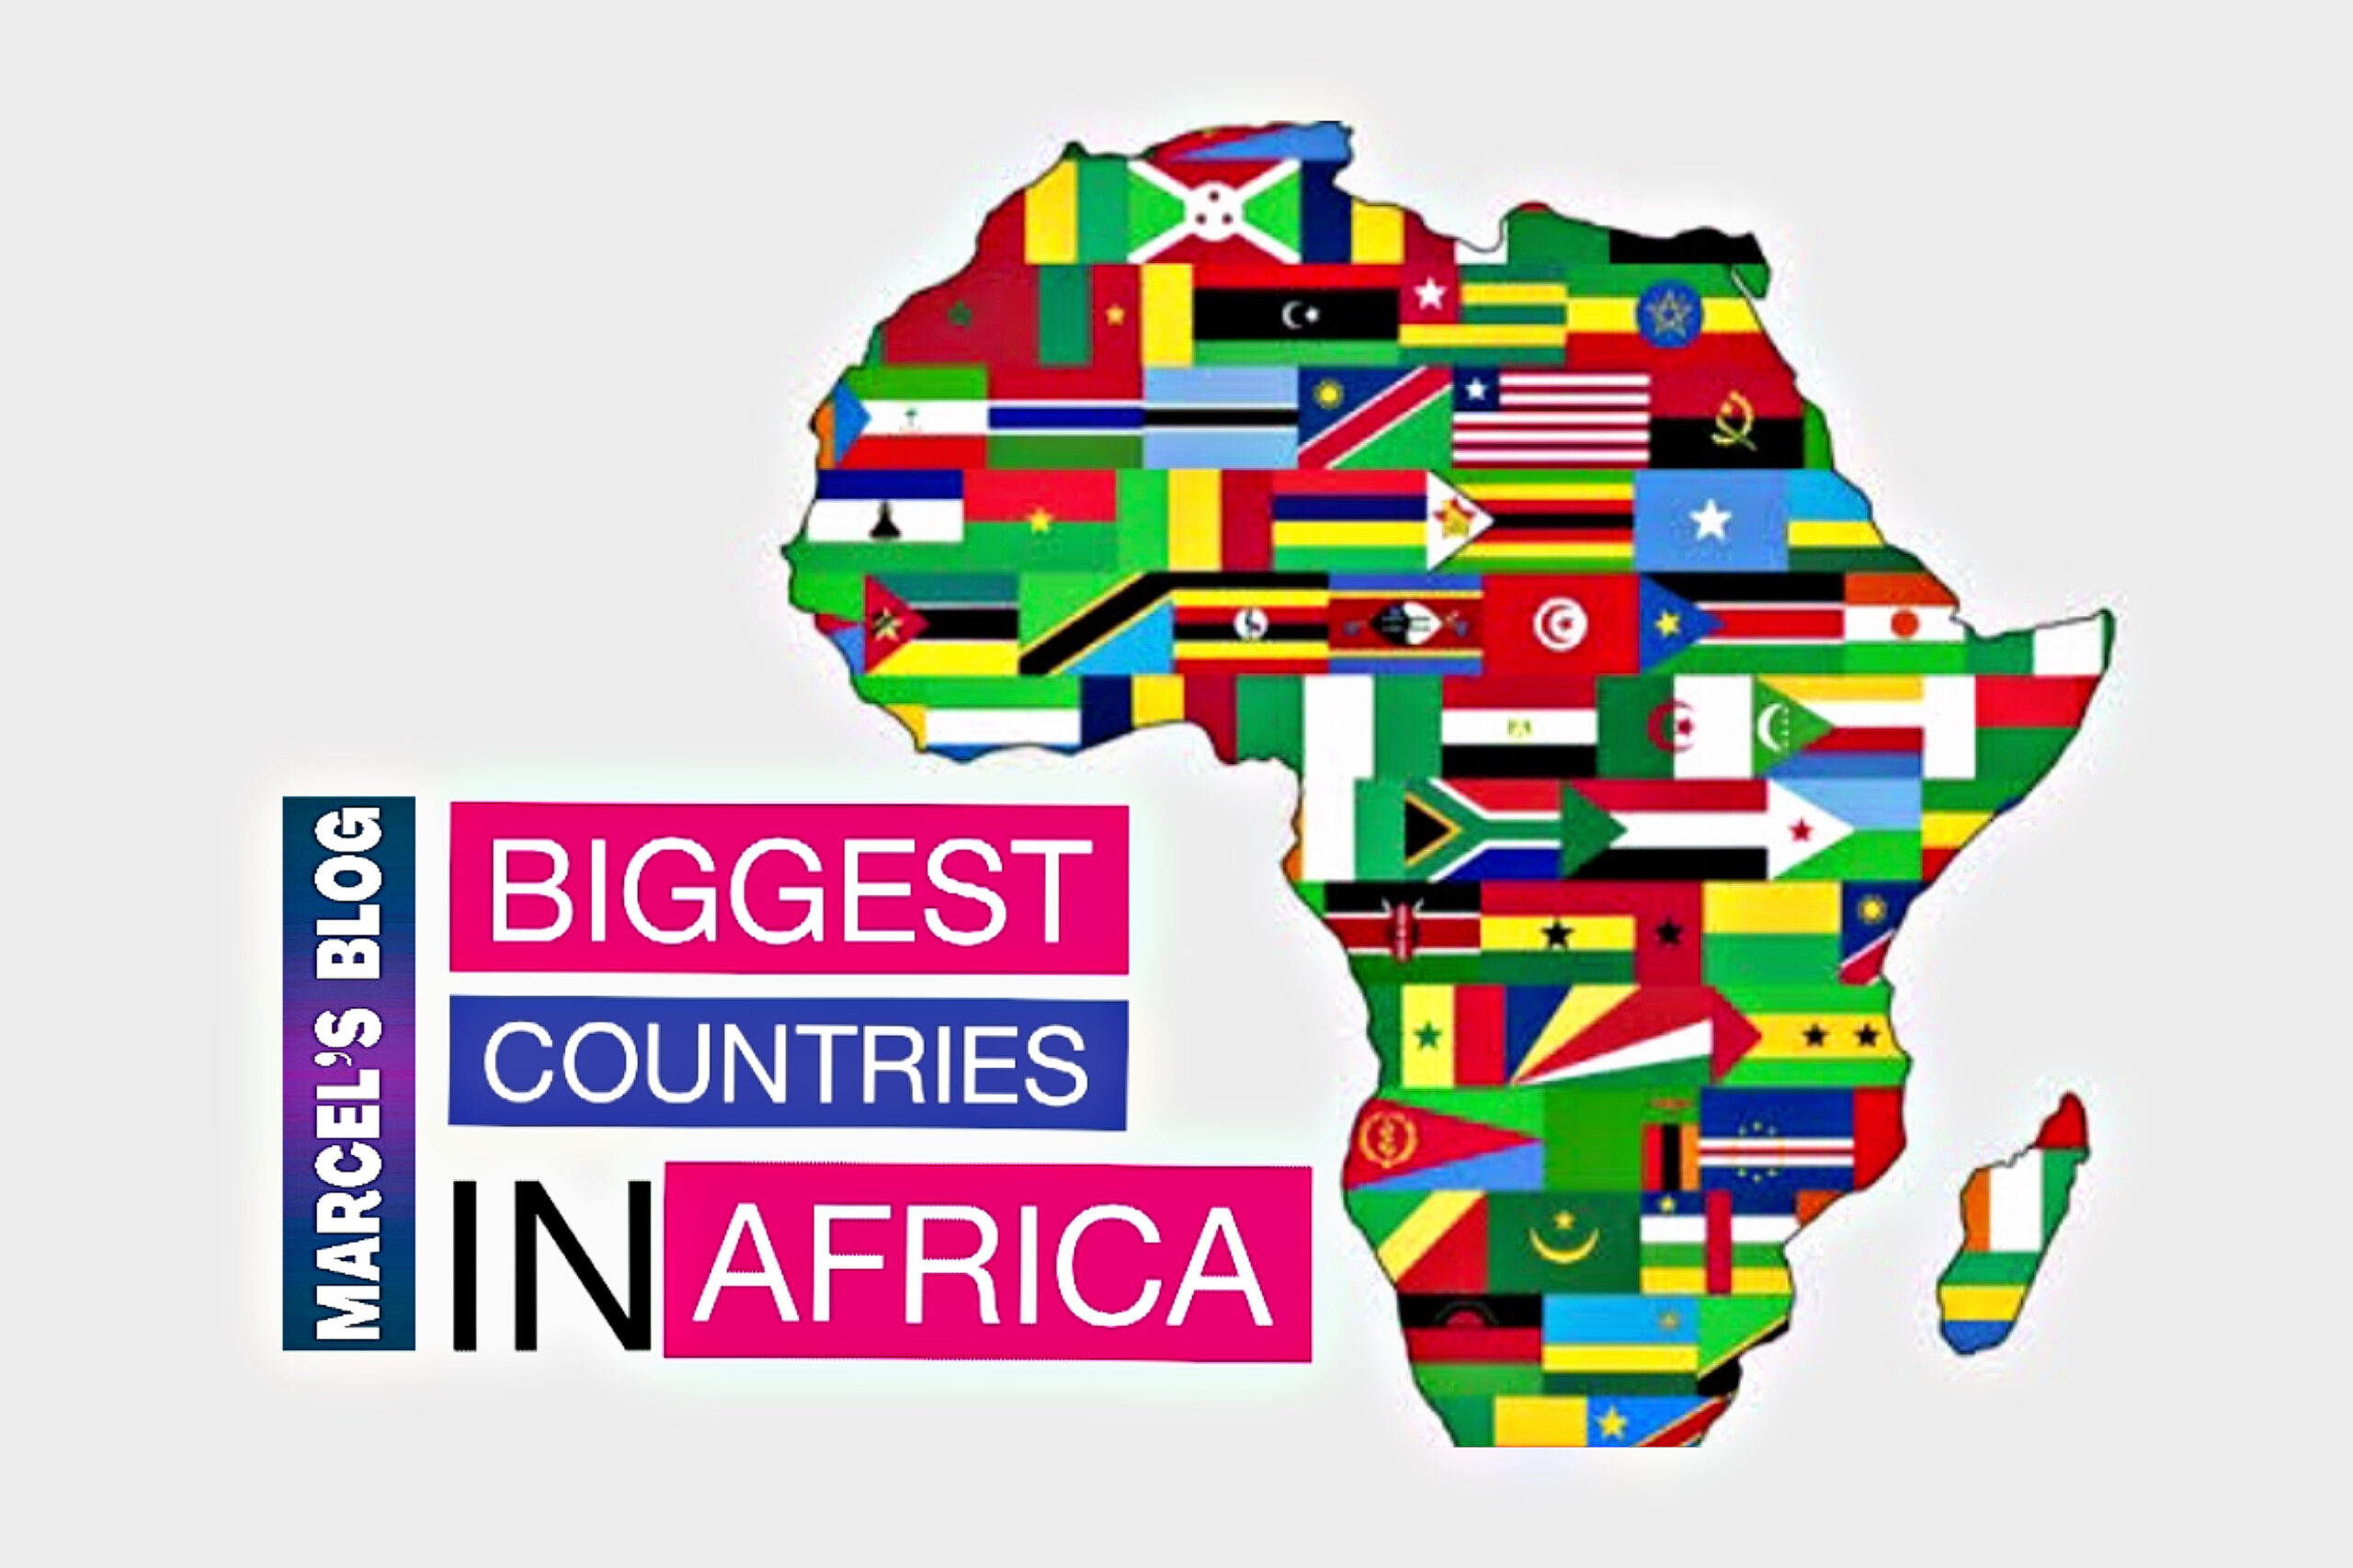 The Biggest Country in Africa - List of African Countries By Size